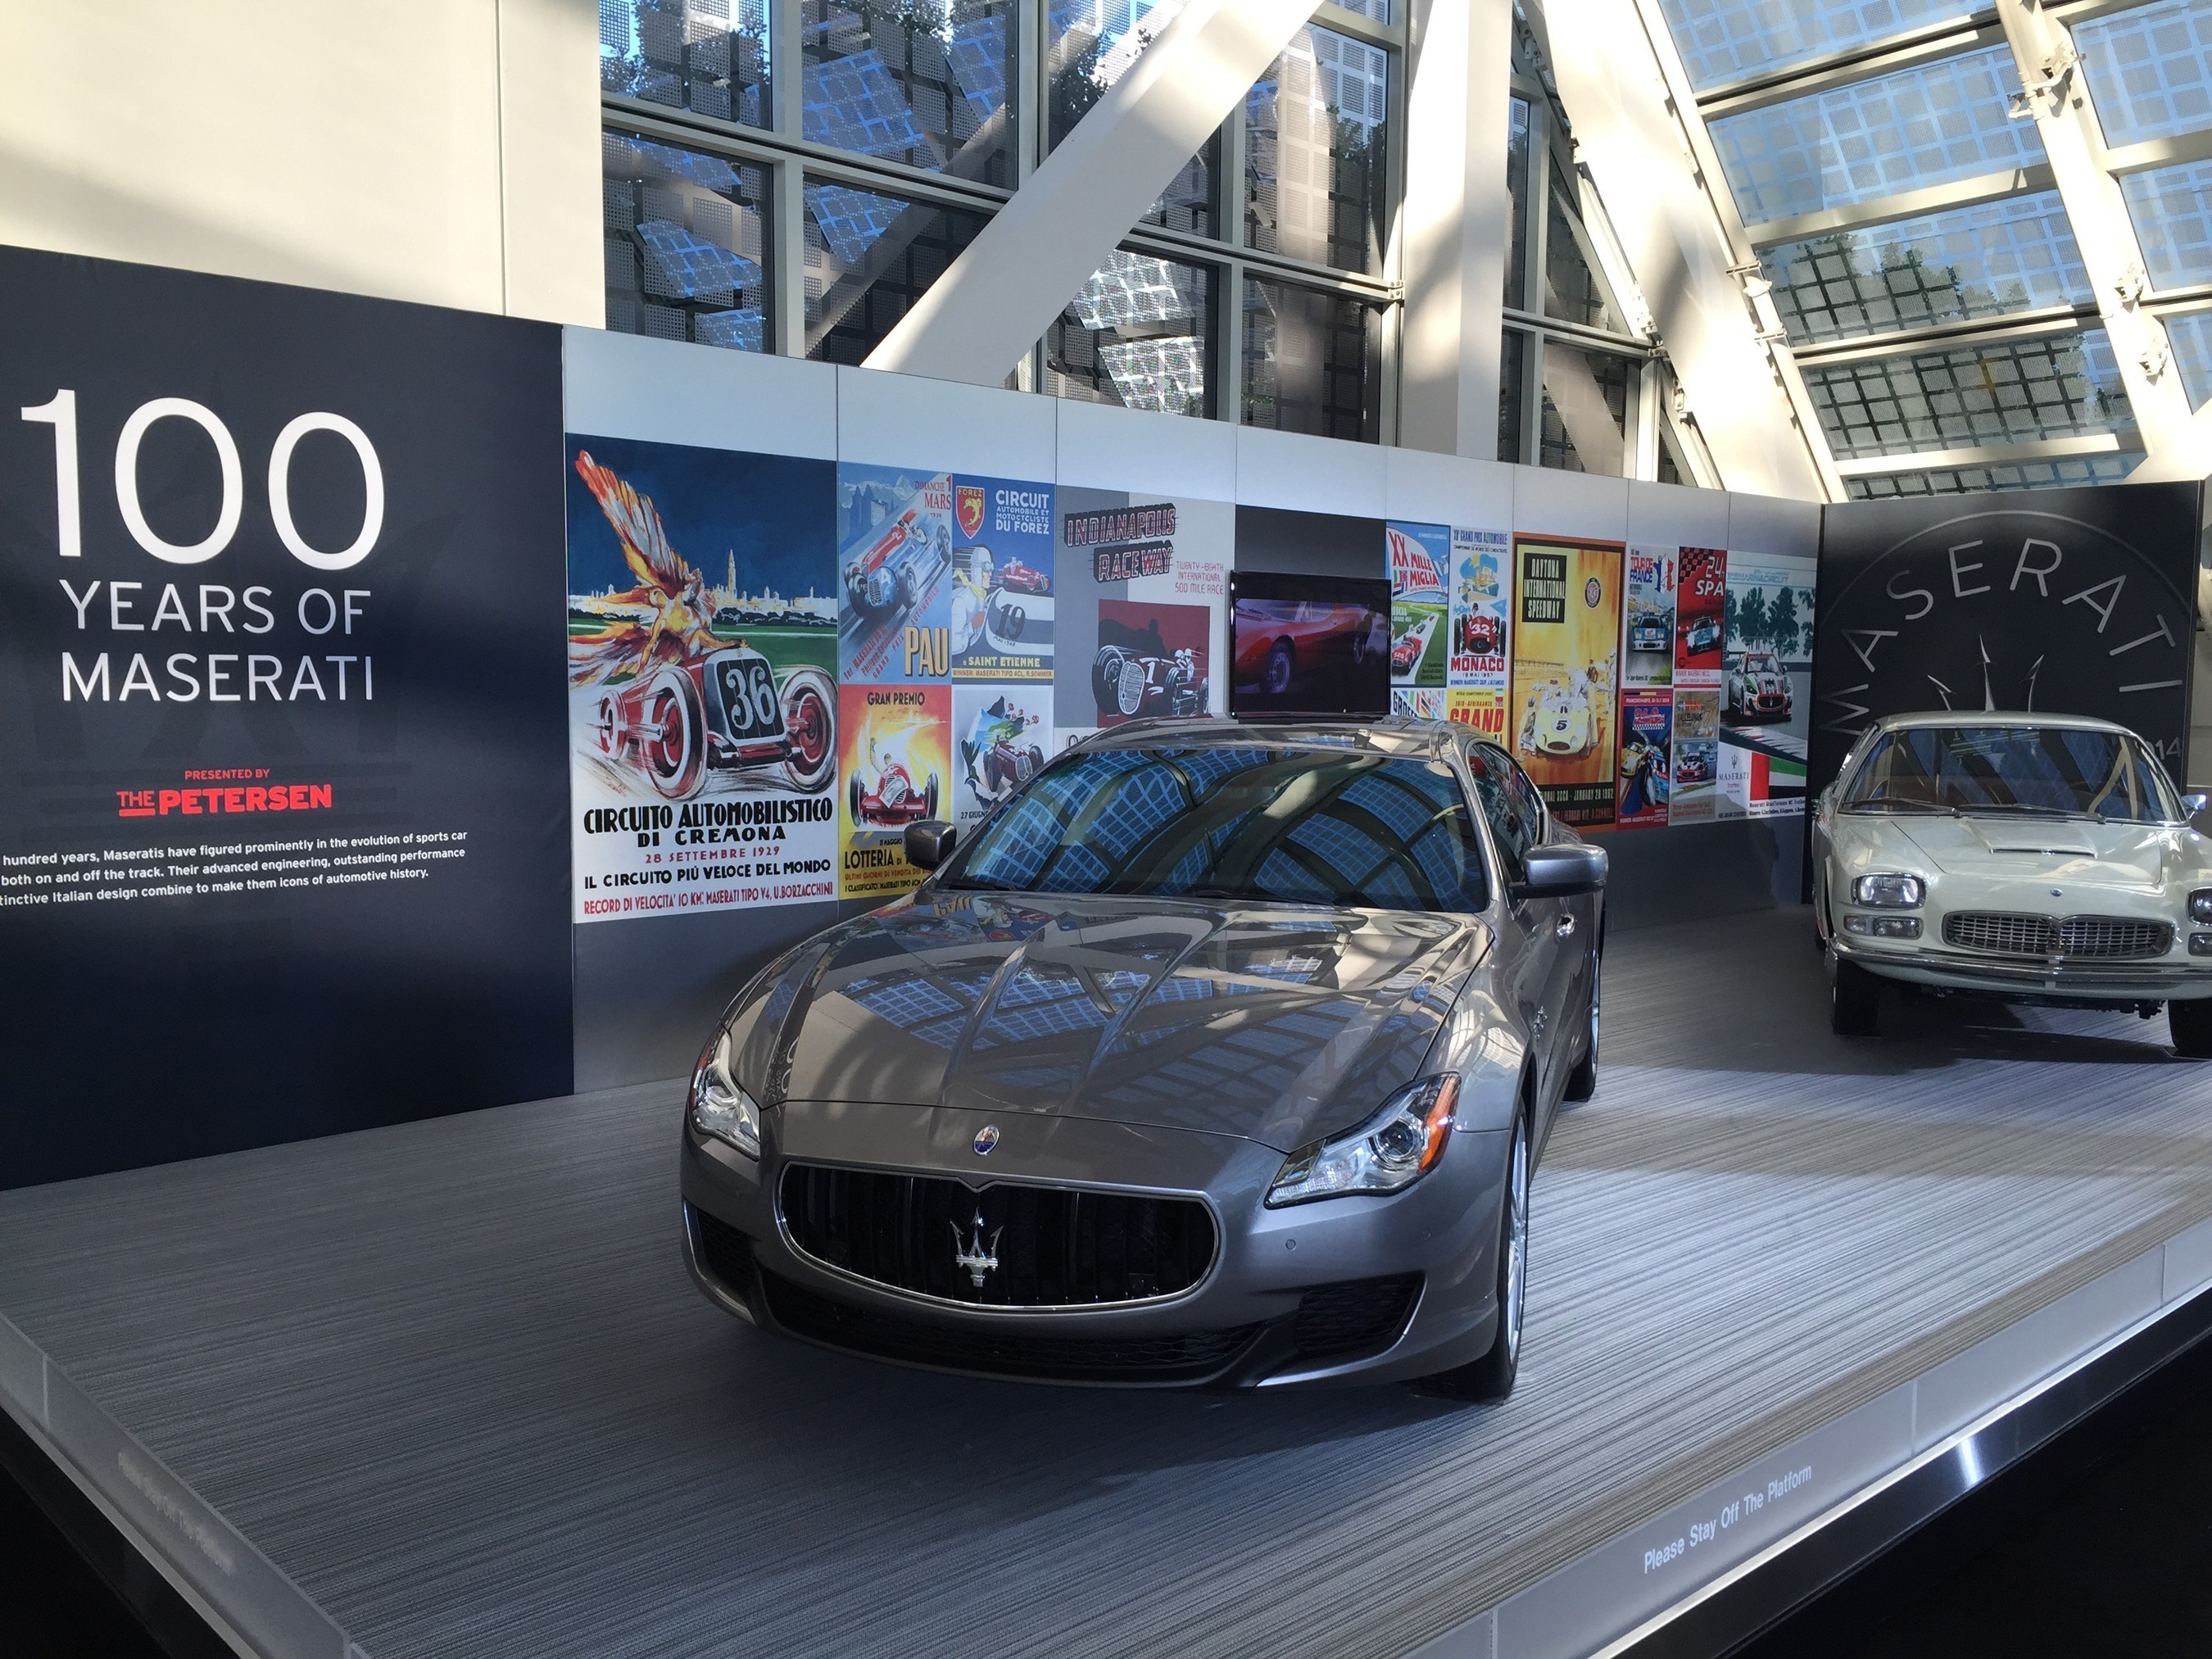 Maserati: Current and classic Quattroporte on display in partnership with the Petersen Automotive Museum honoring 100 years of Maserati